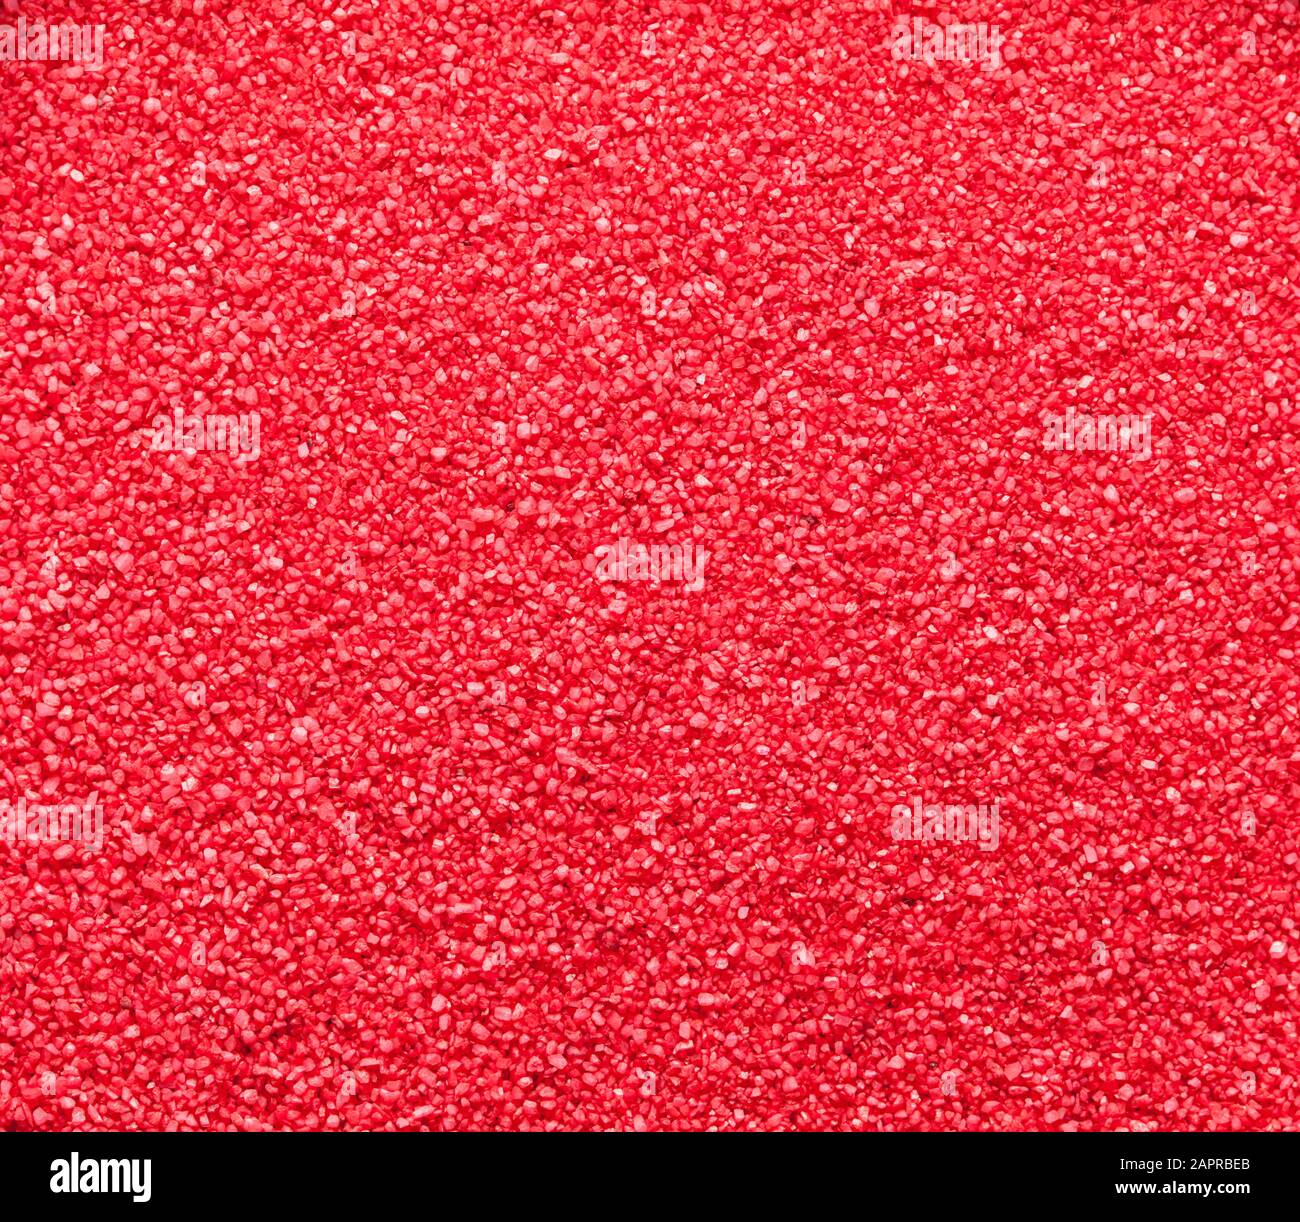 Small Bright Red Fish Tank Gravel Background. Stock Photo